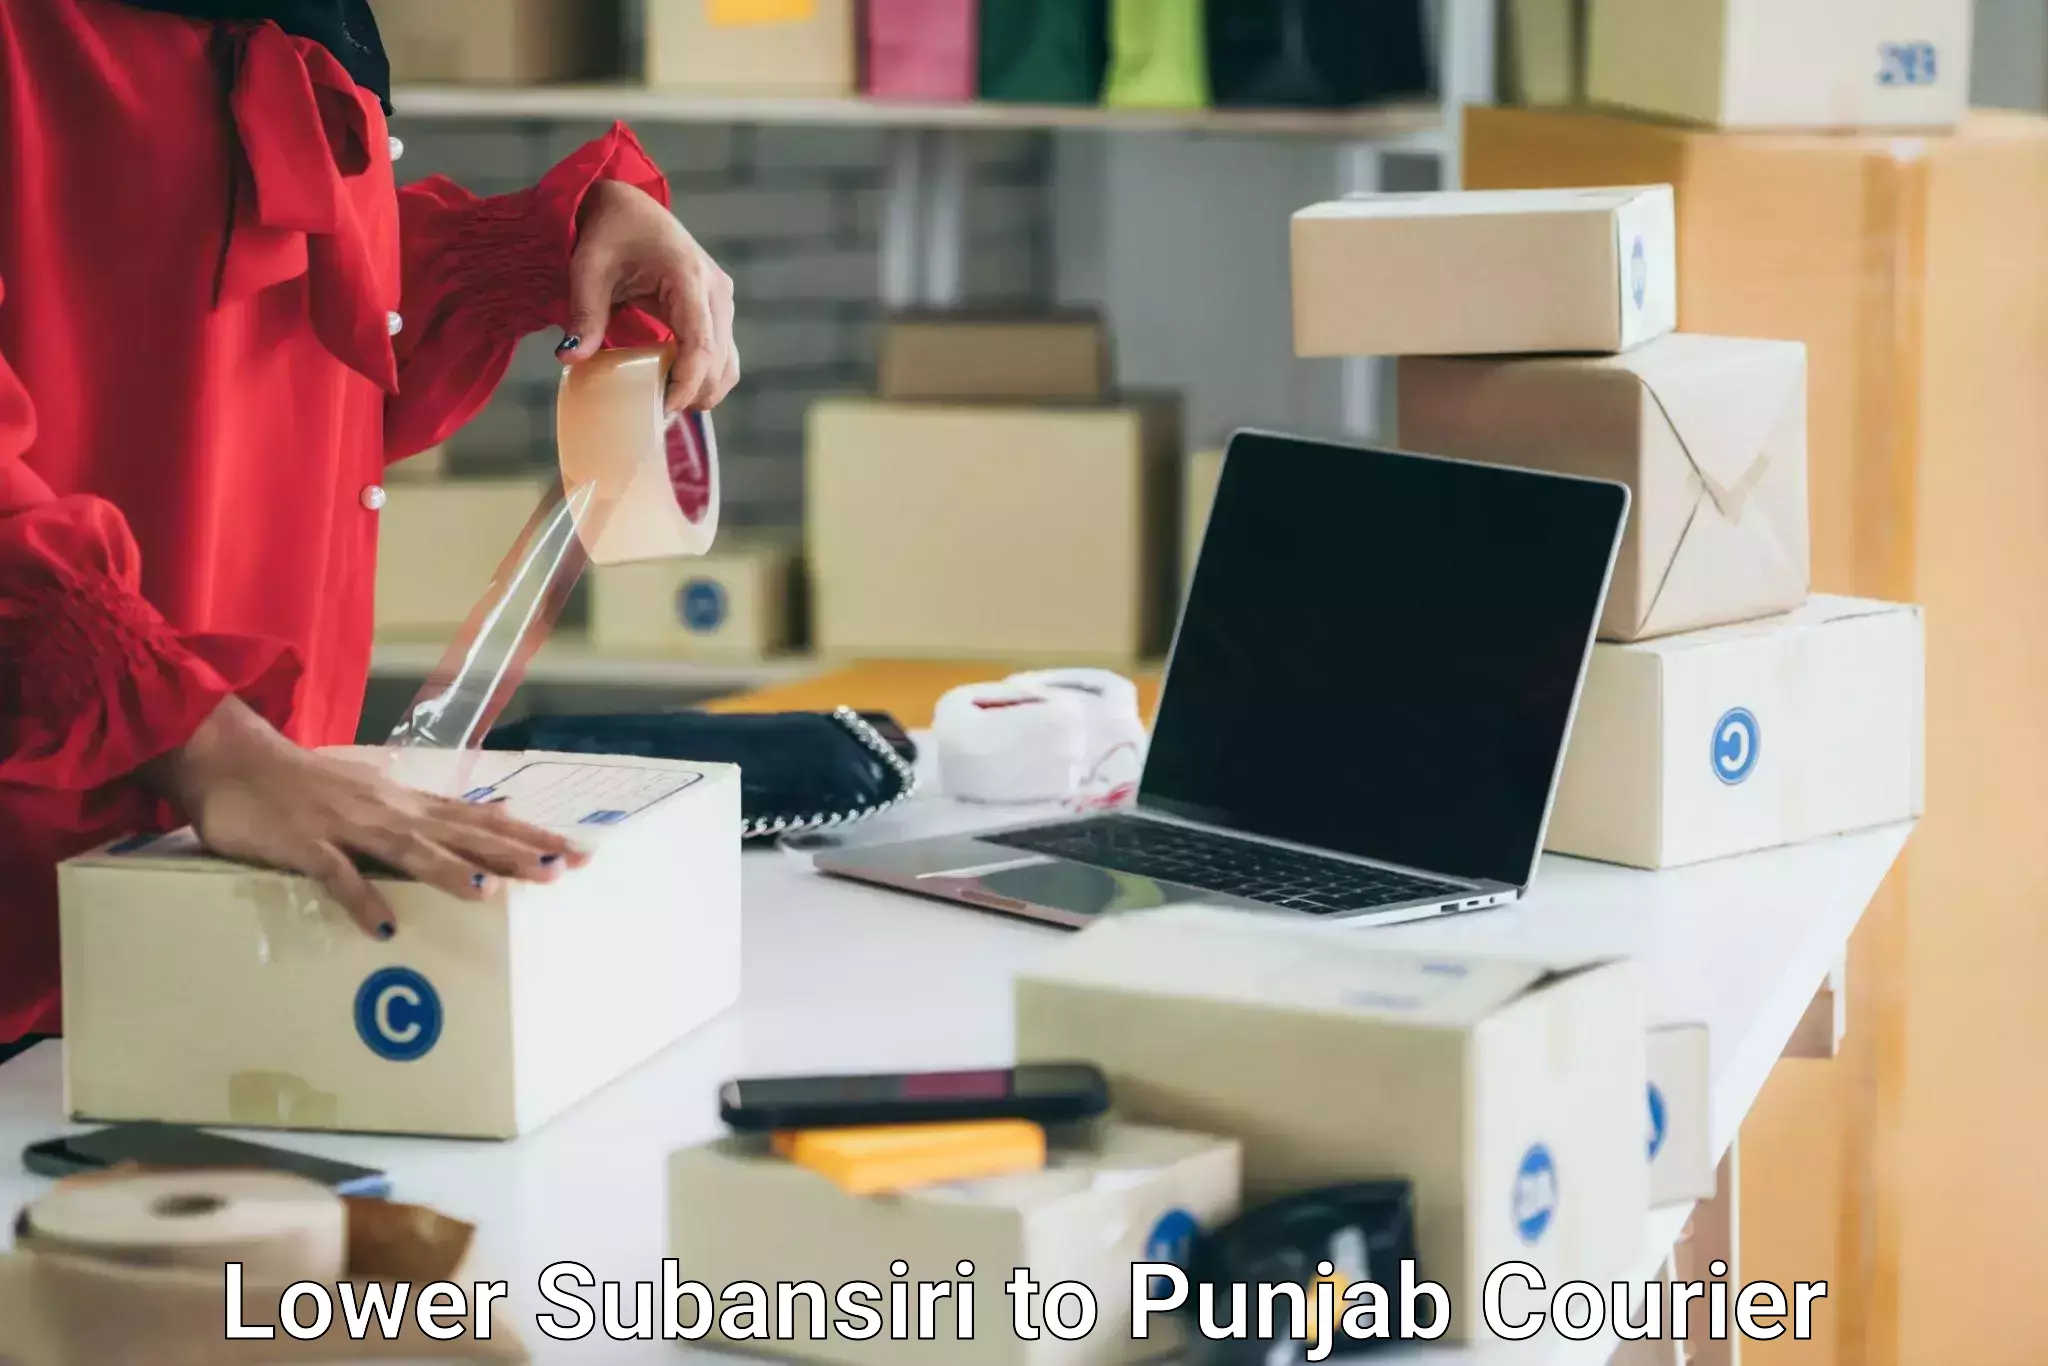 Customized relocation services in Lower Subansiri to Punjab